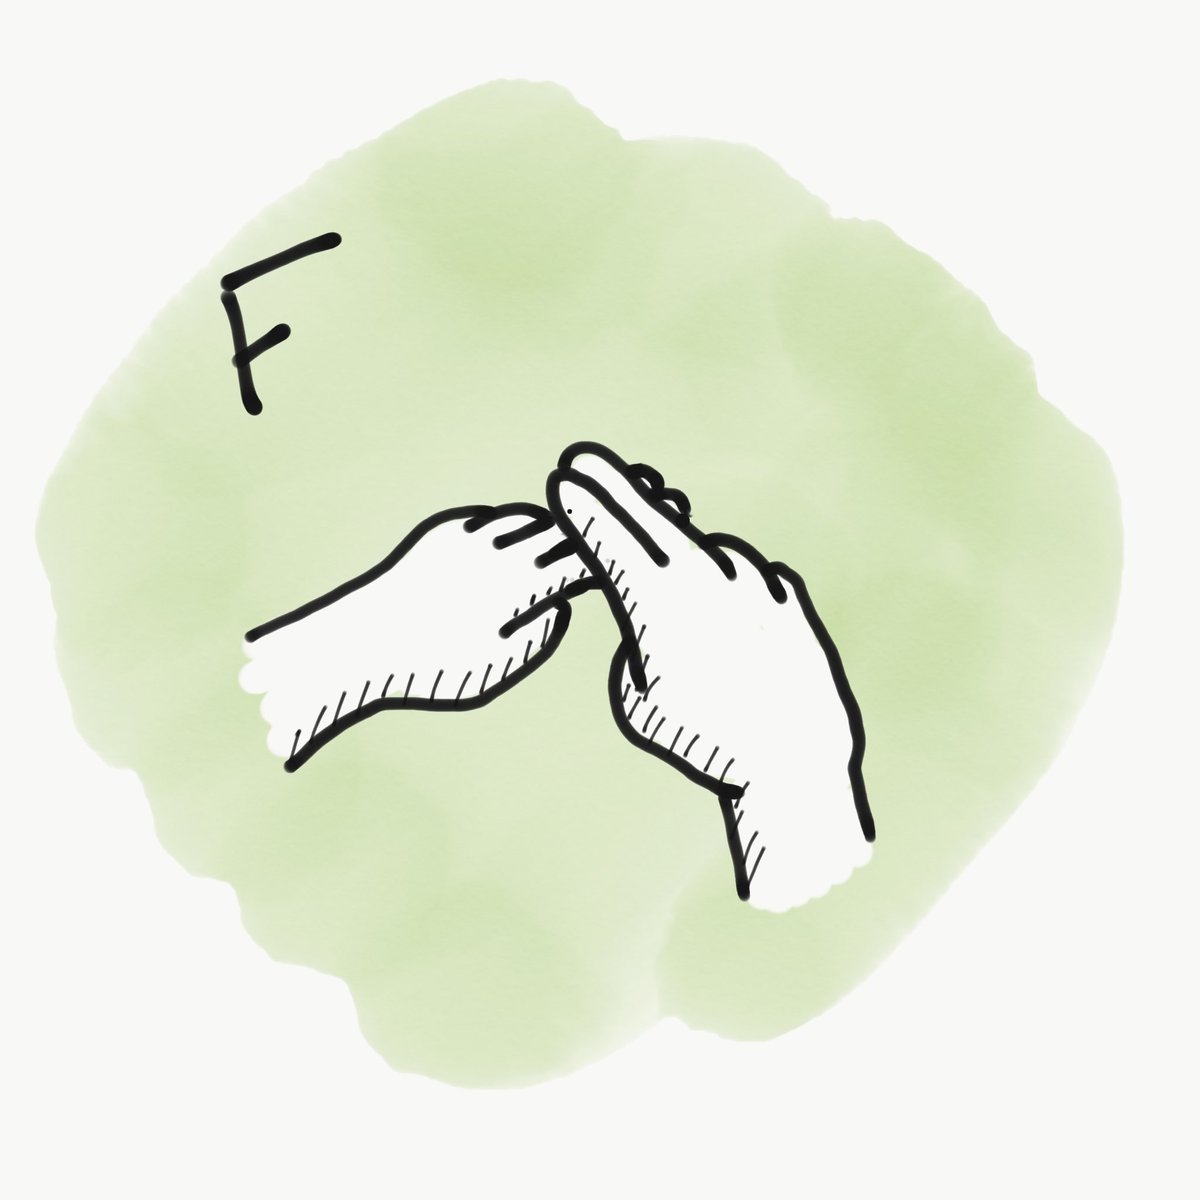 It was  #DeafAwarenessWeek this past week, and I took the opportunity to relearn the BSL finger-spelling alphabet. I drew all of the letters out to help remember them... 